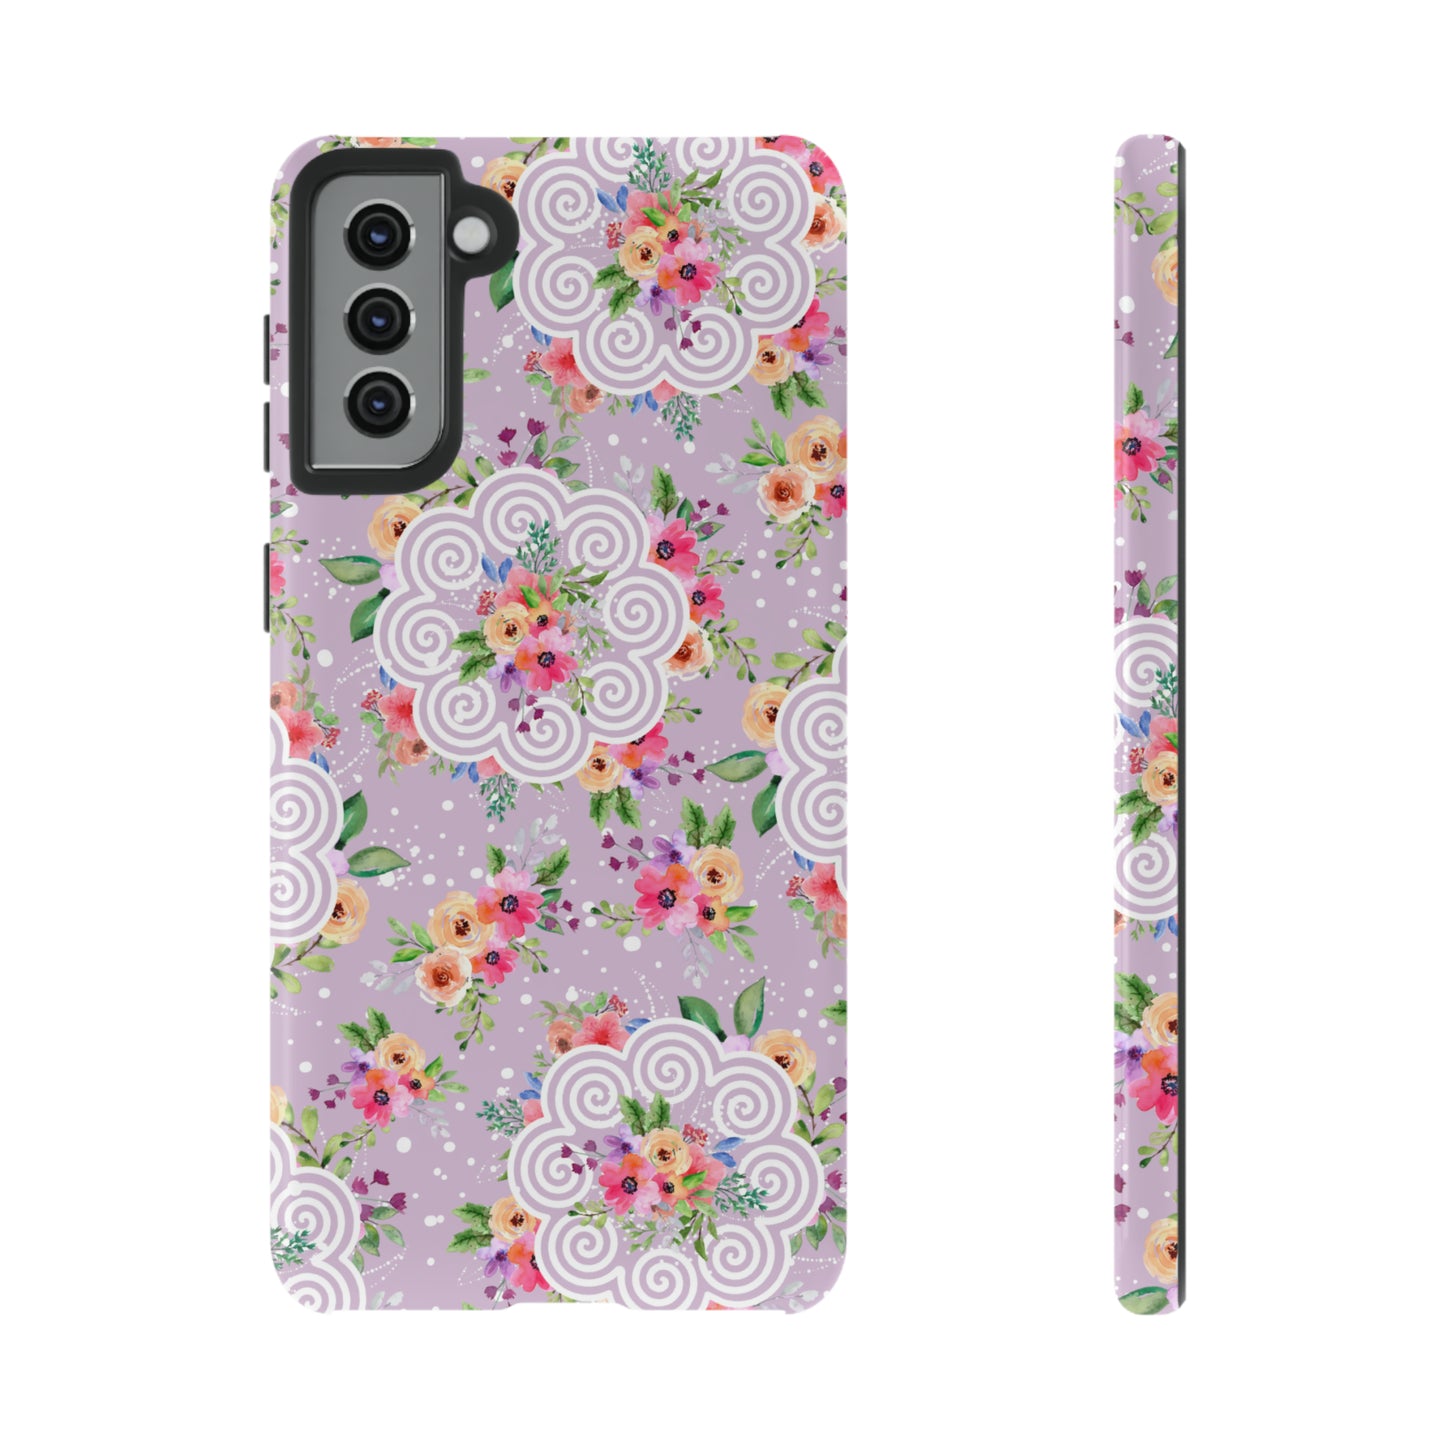 Phone Case Floral Hmong Inspired